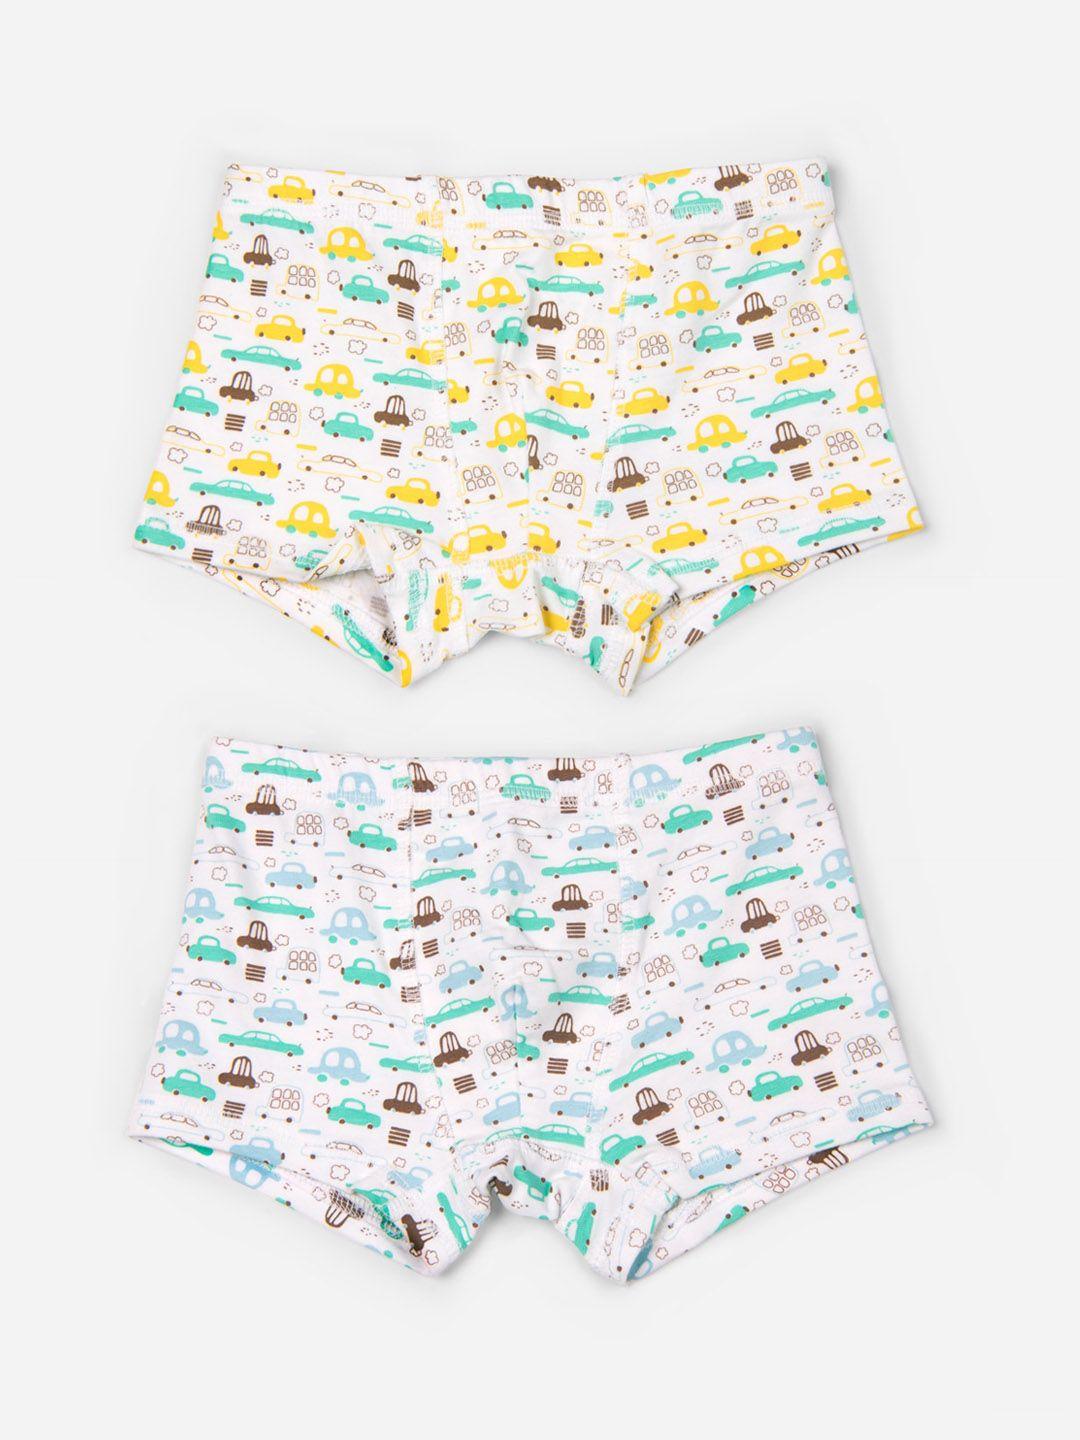 keebee-boys-pack-of-2-printed-organic-cotton-boxer-style-briefs